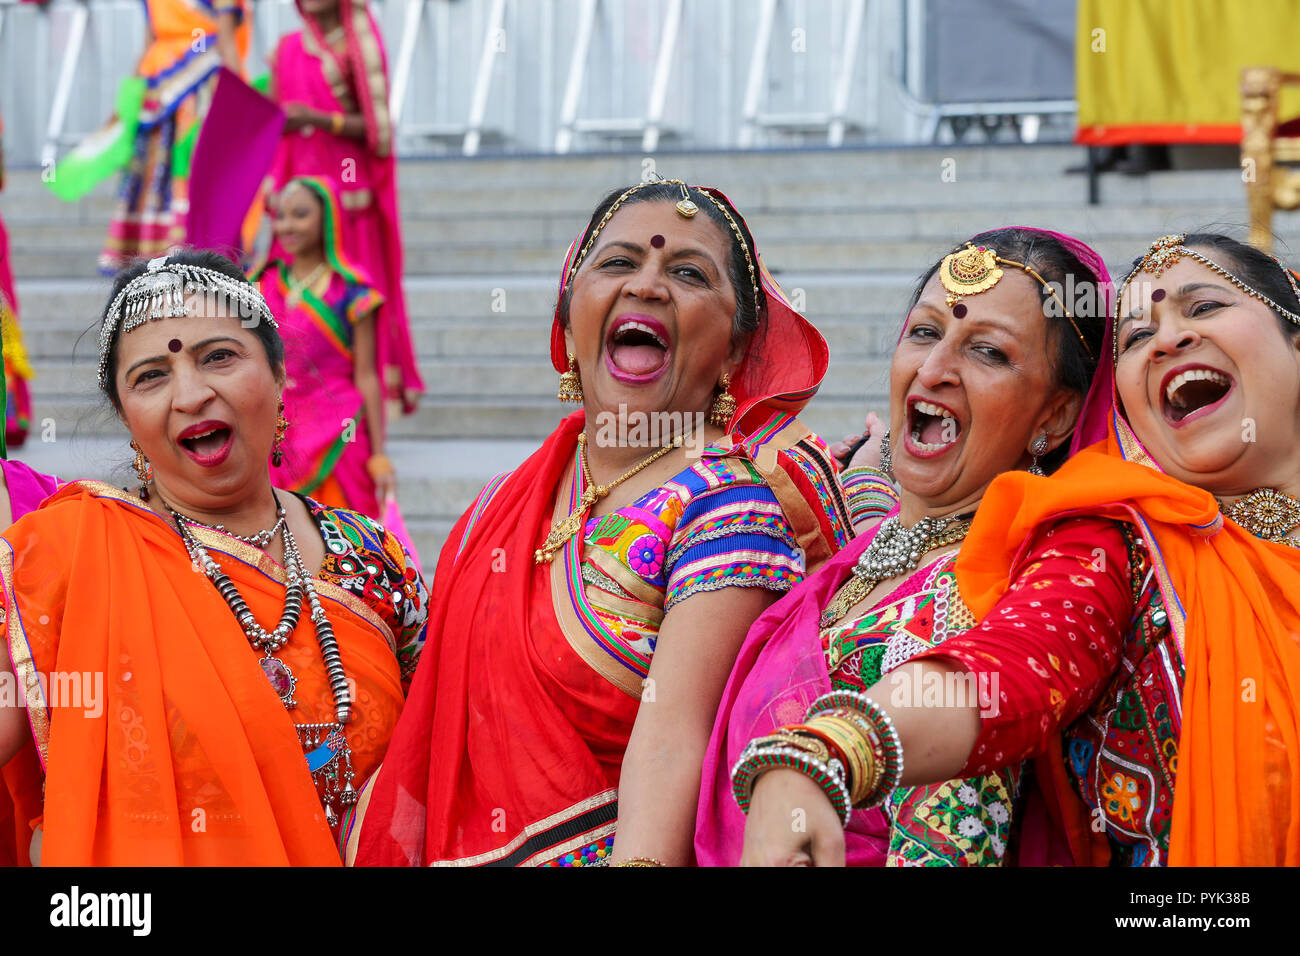 Trafalgar Square, London, UK. 28 Oct 2018 - Performers during the Mass Ghoomar Dance - a traditional Gujarati folk dance of the Bhil tribe performed in worship to Goddess Sarasvati, were the dancers twirling in and out of a wide circle.  Hundreds of Hindus, Sikhs, Jains and people from all communities attend Diwali celebrations in London - festival of light, Diwali in London is celebrated each year with a free concert of traditional religious and contemporary Asian music and dance.  Credit: Dinendra Haria/Alamy Live News Stock Photo